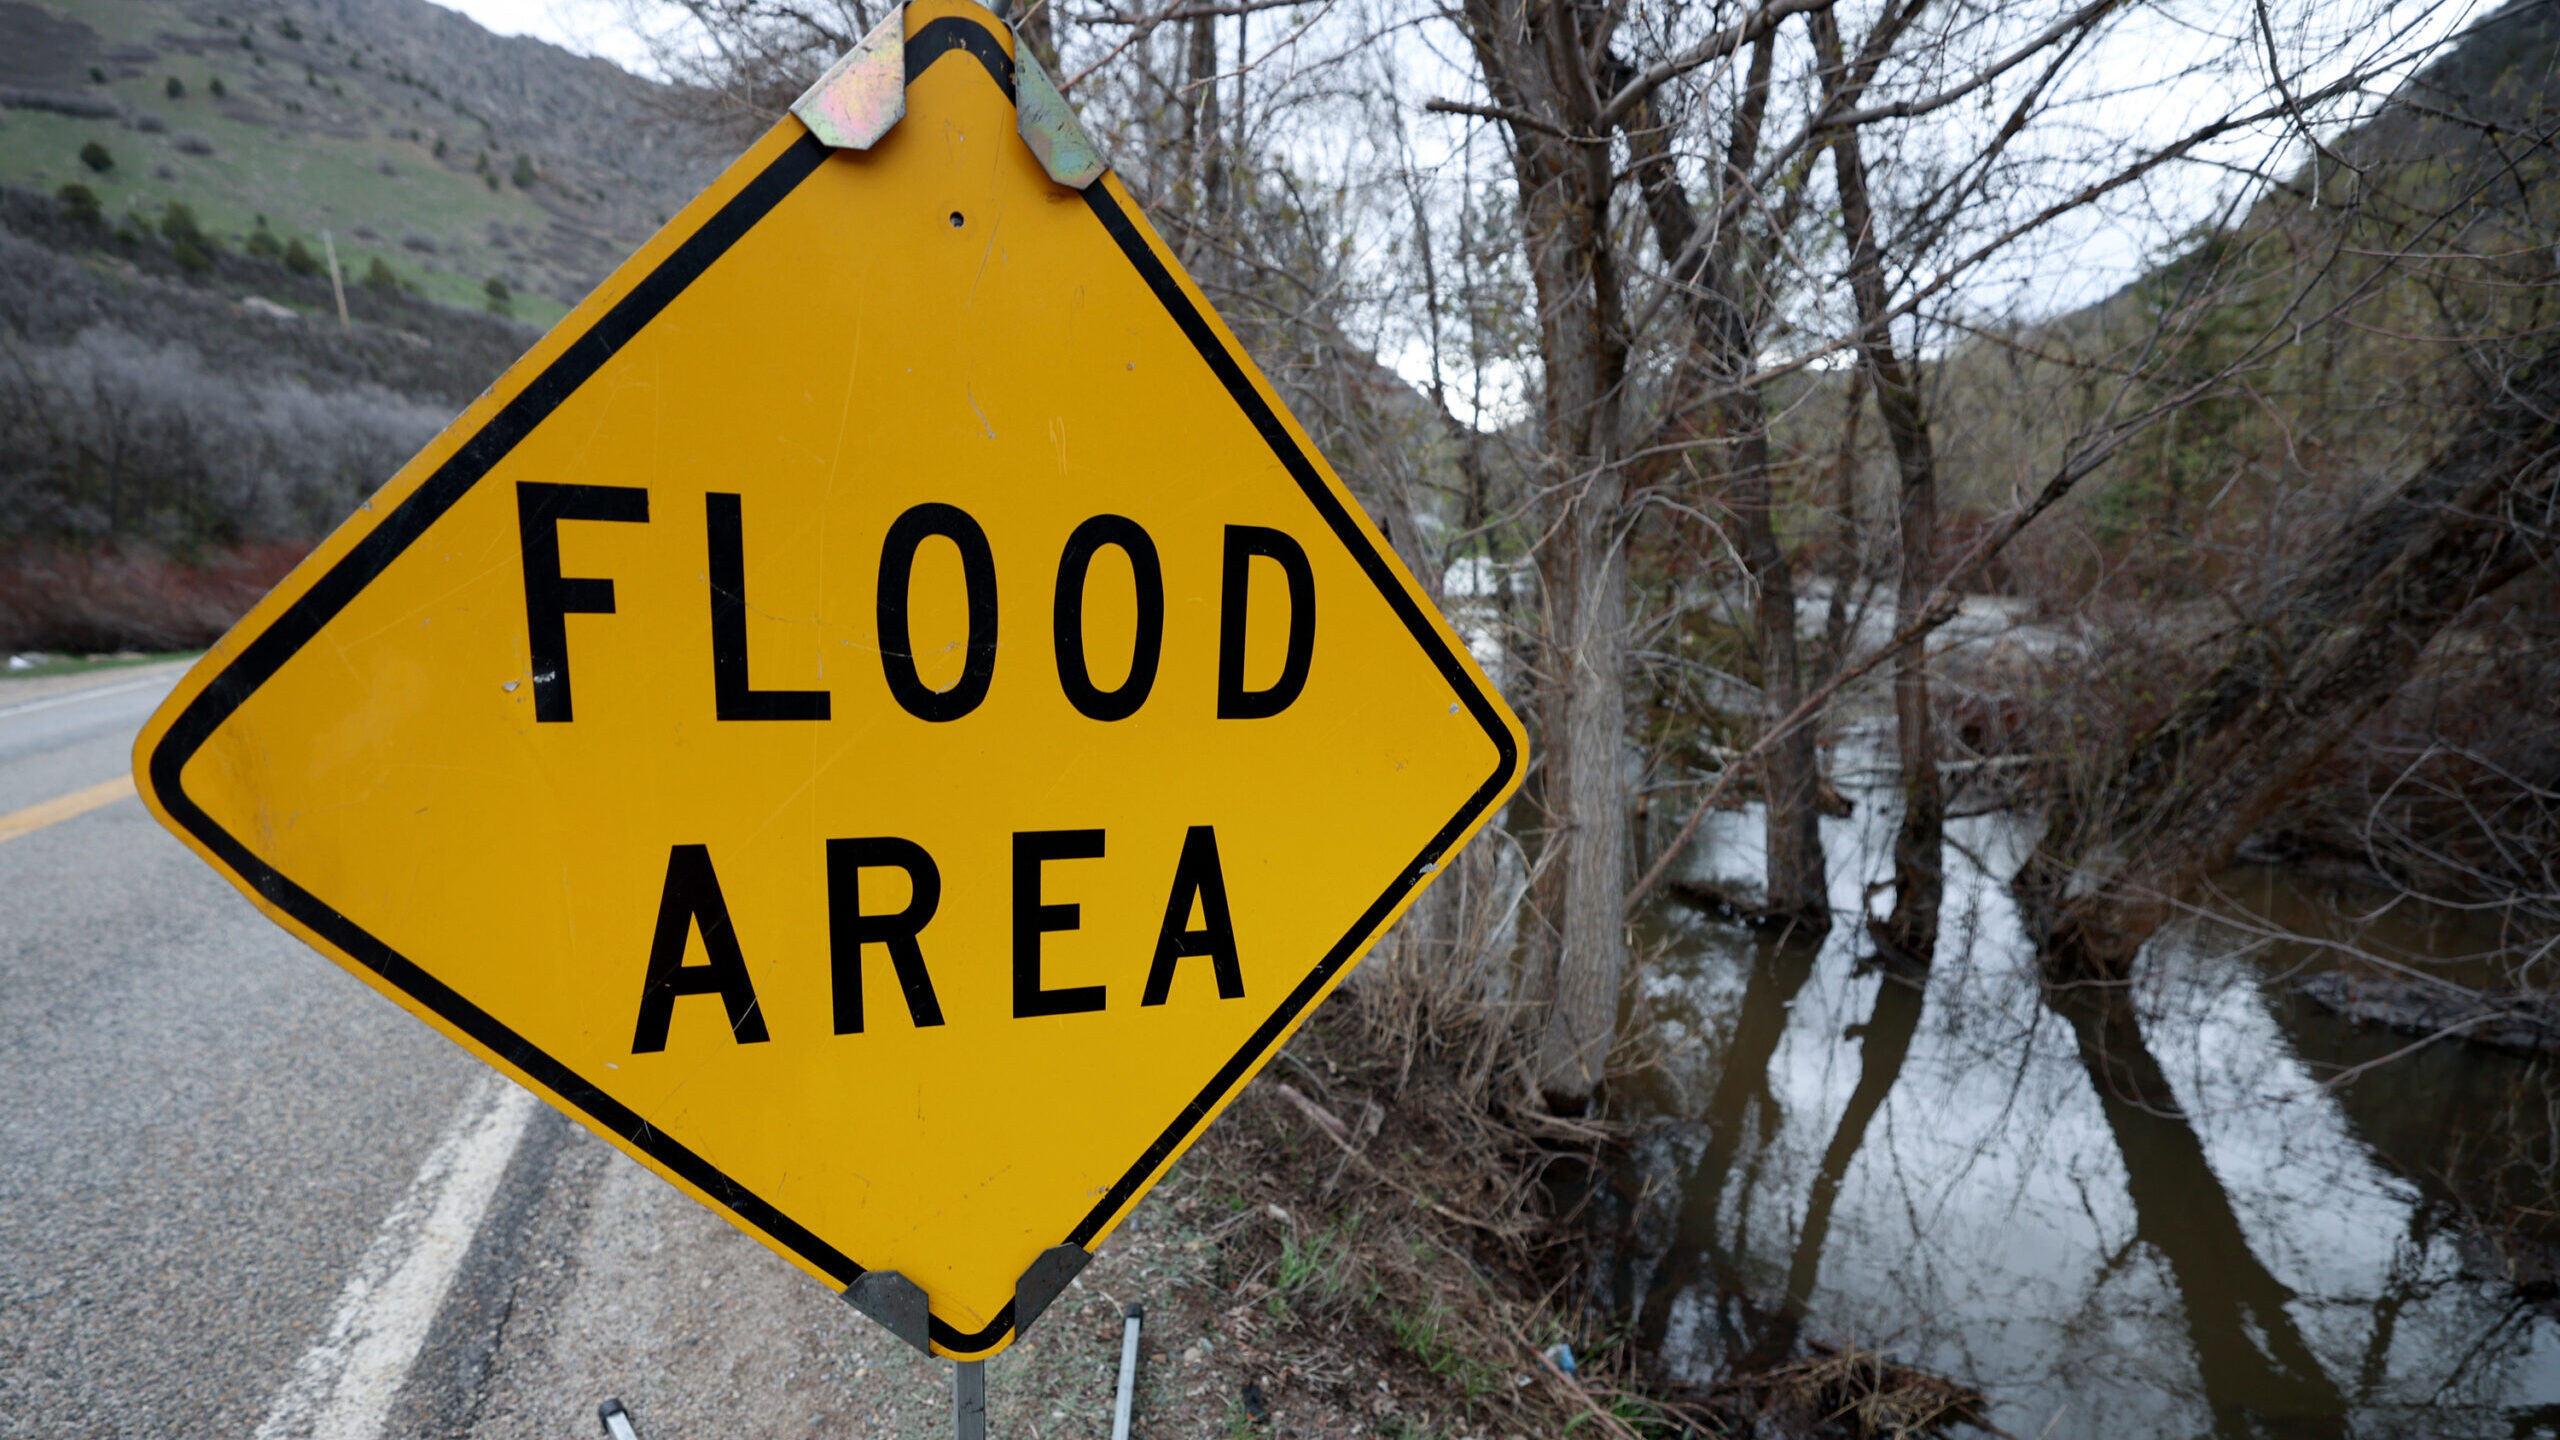 For one of the first times this spring, the Logan River in Utah has entered flood stage. And it's t...